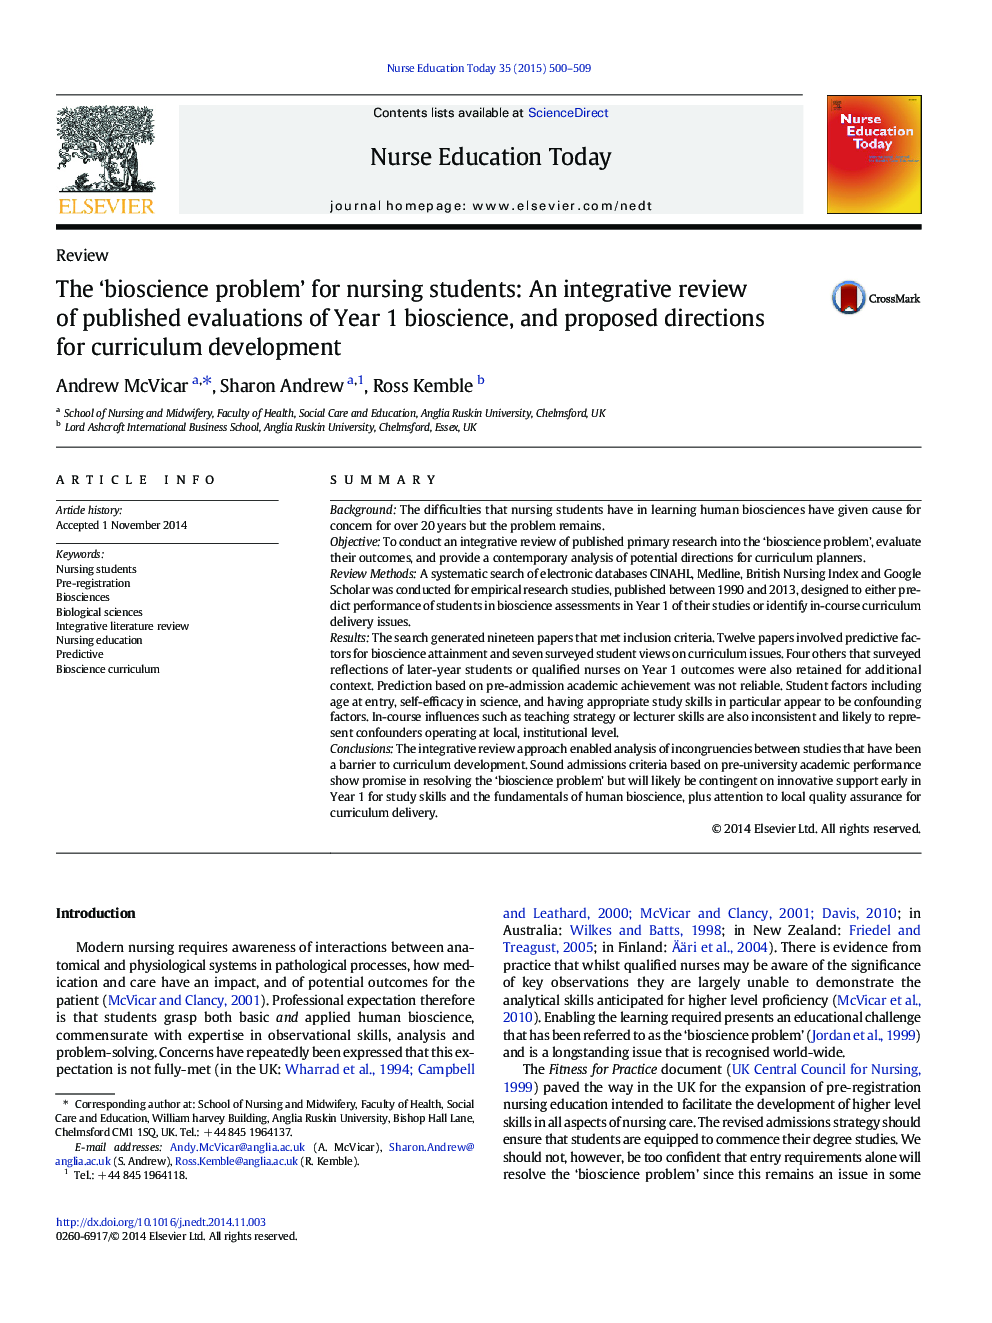 The ‘bioscience problem’ for nursing students: An integrative review of published evaluations of Year 1 bioscience, and proposed directions for curriculum development